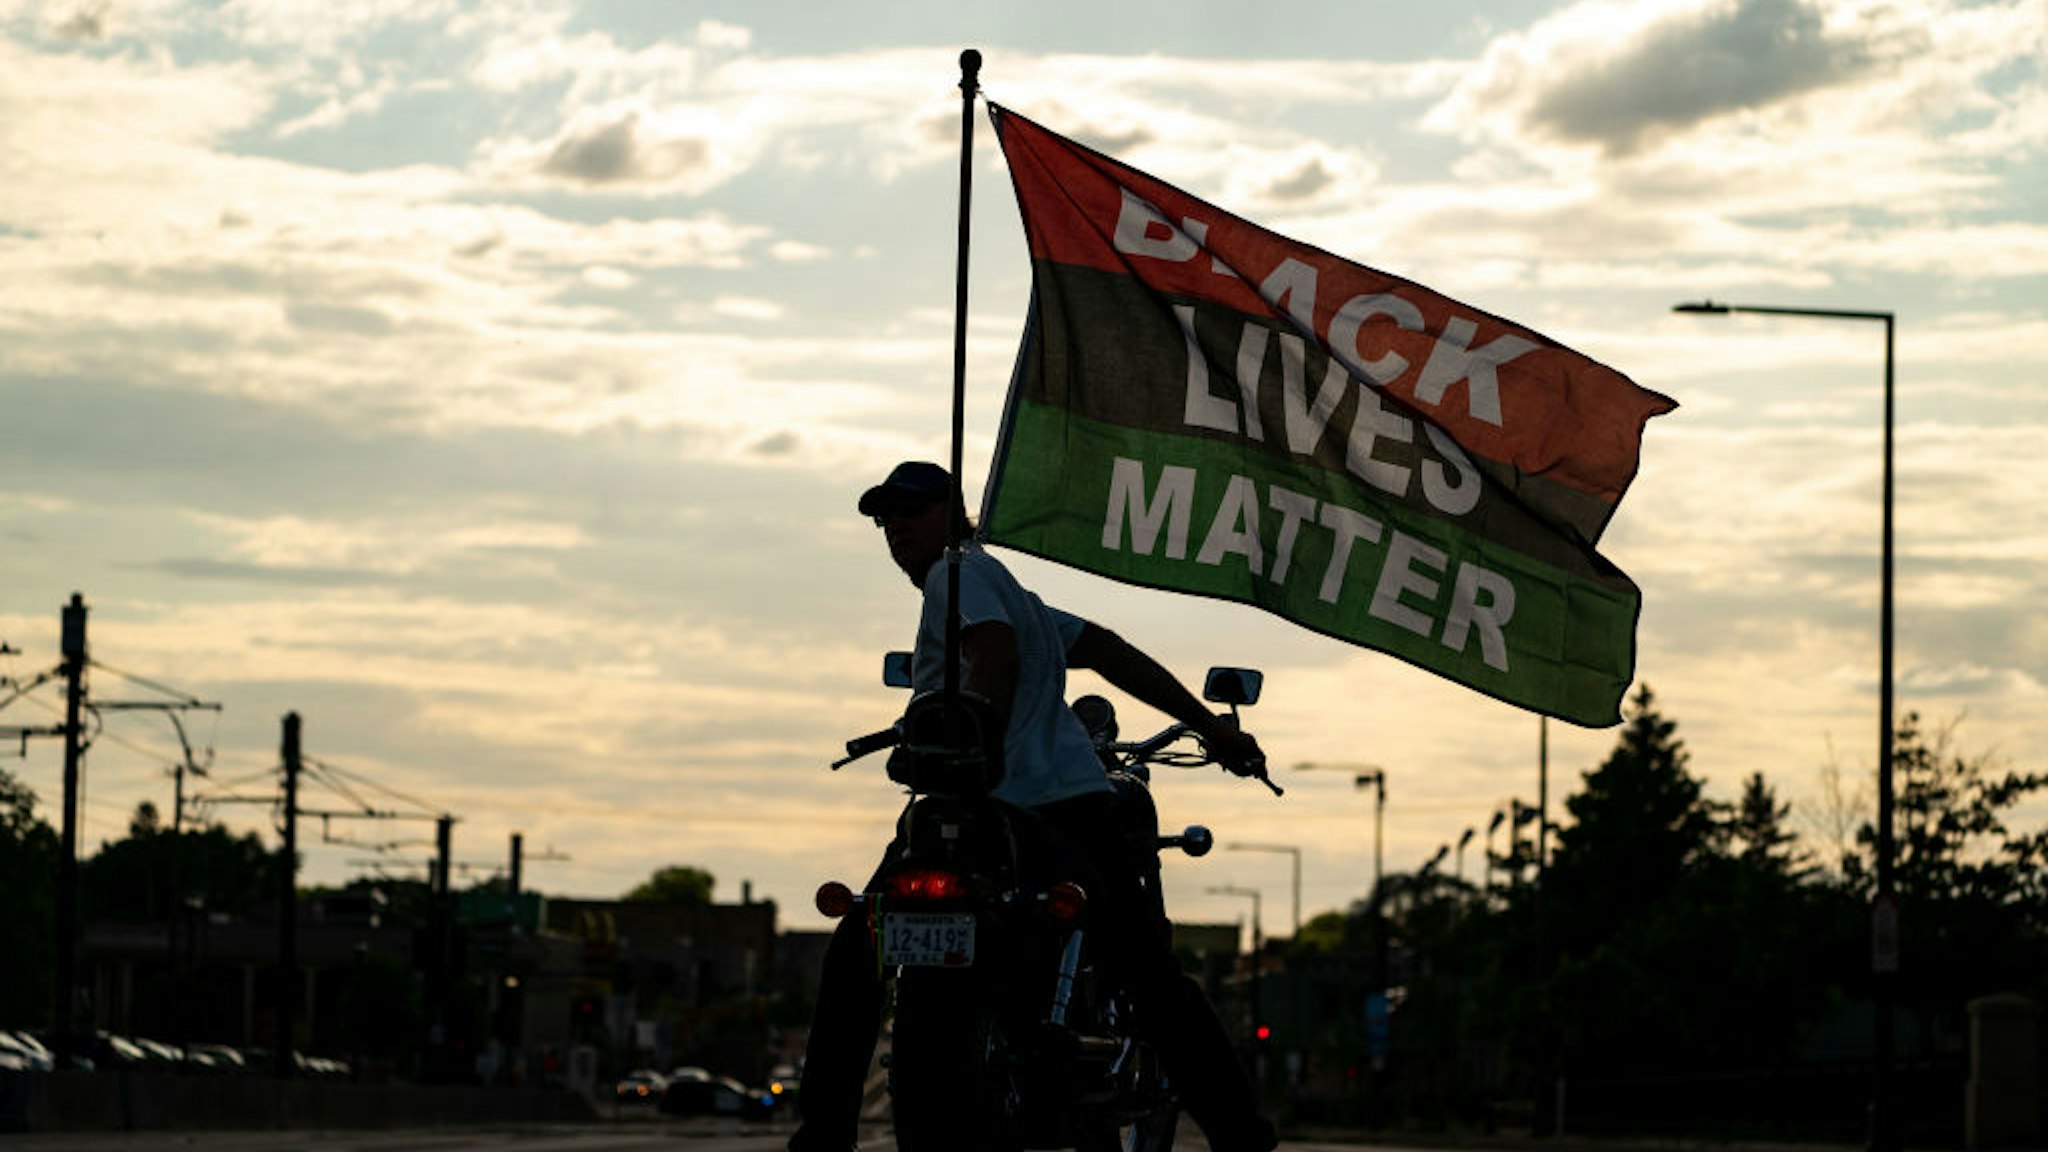 ST. PAUL, MN - MAY 24: A man on a motorcycle displays a Black Lives Matter flag during a march and rally at the Minnesota State Capitol on Monday, May 24, 2021 in St. Paul, MN.